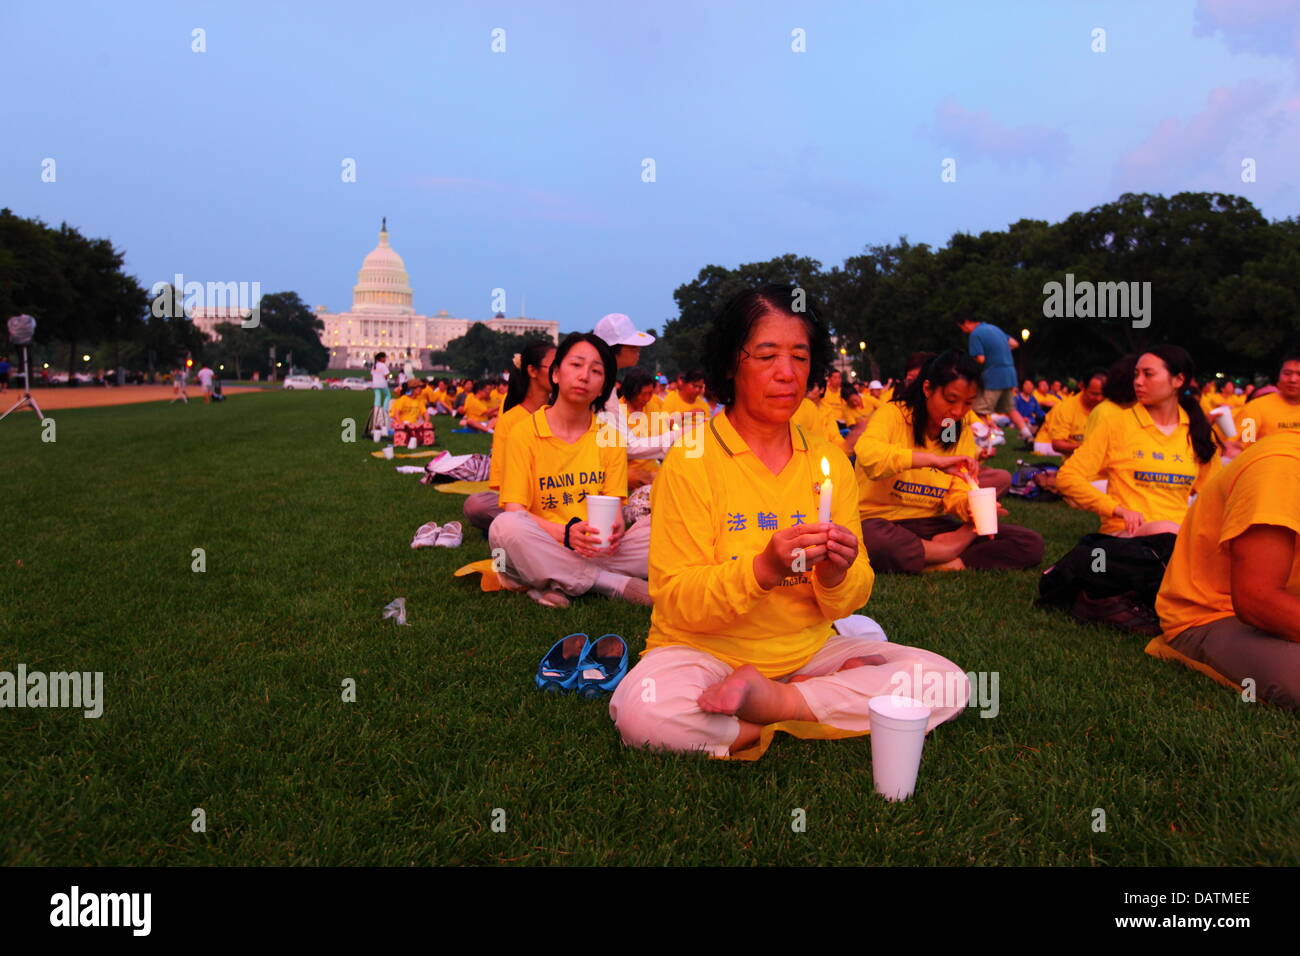 Washington DC, USA. 18th July, 2013. Falun Gong members commemorate the 14th anniversary of the Chinese government crackdown against them which began on 20th July 1999. In the background is the United States Capitol Building. Credit:  James Brunker / Alamy Live News Stock Photo